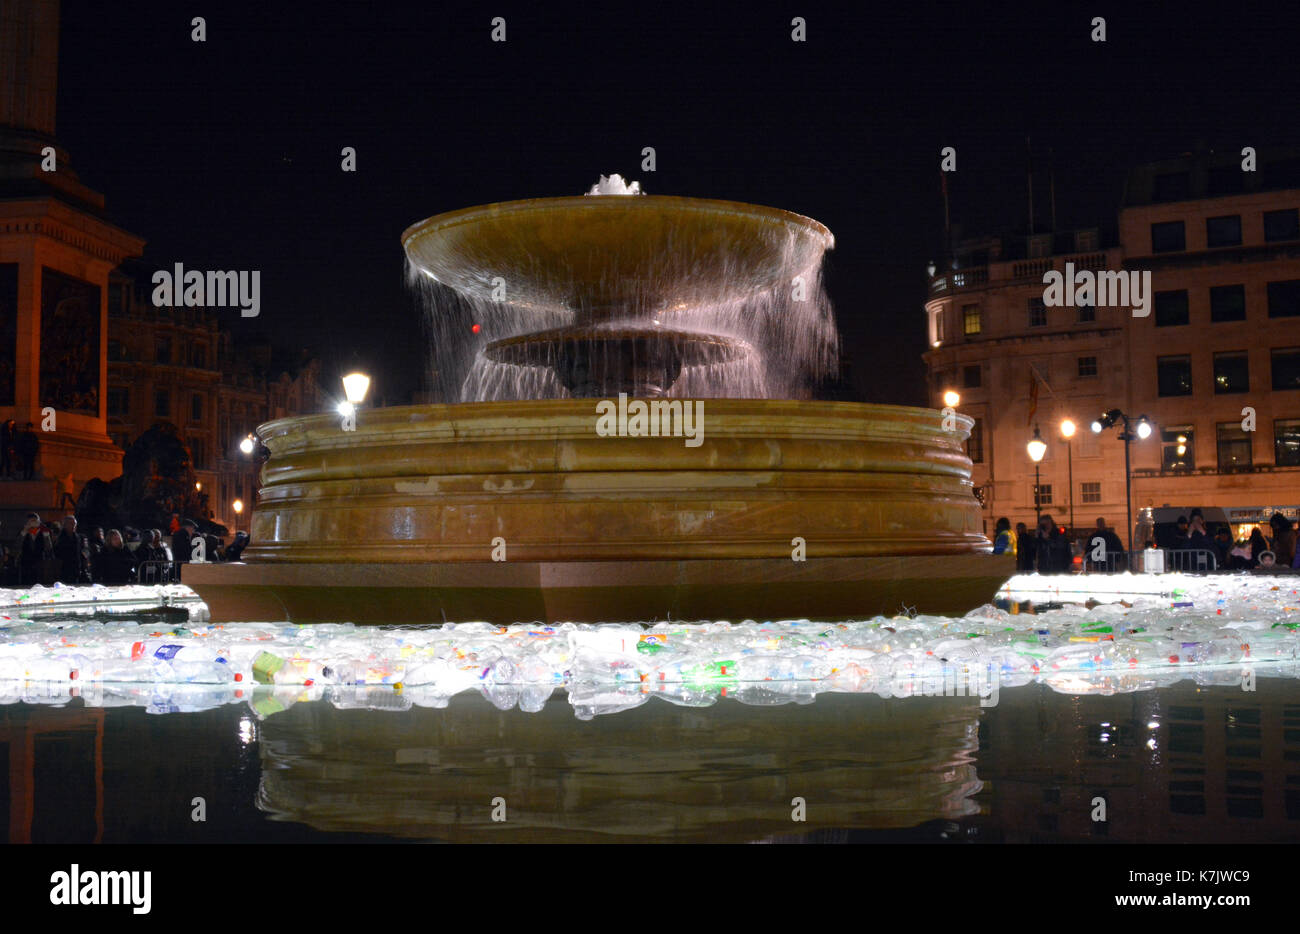 Photo Must Be Credited ©Alpha Press 066465 16/01/2016 Plastic Islands by Luzinterruptus in Trafalgar Square at the Lumiere London Light Festival. Plastic Islands is inspired by the Eighth Continent: the Garbage Patch of marine litter that accumulates in the North Pacific Ocean. It comments on the alarming rate that rubbish is swallowing large areas of the Pacific Ocean and the lack of action to tackle this problem. Made from thousands of bottles, this installation both awakens and astounds audiences with its message. Stock Photo